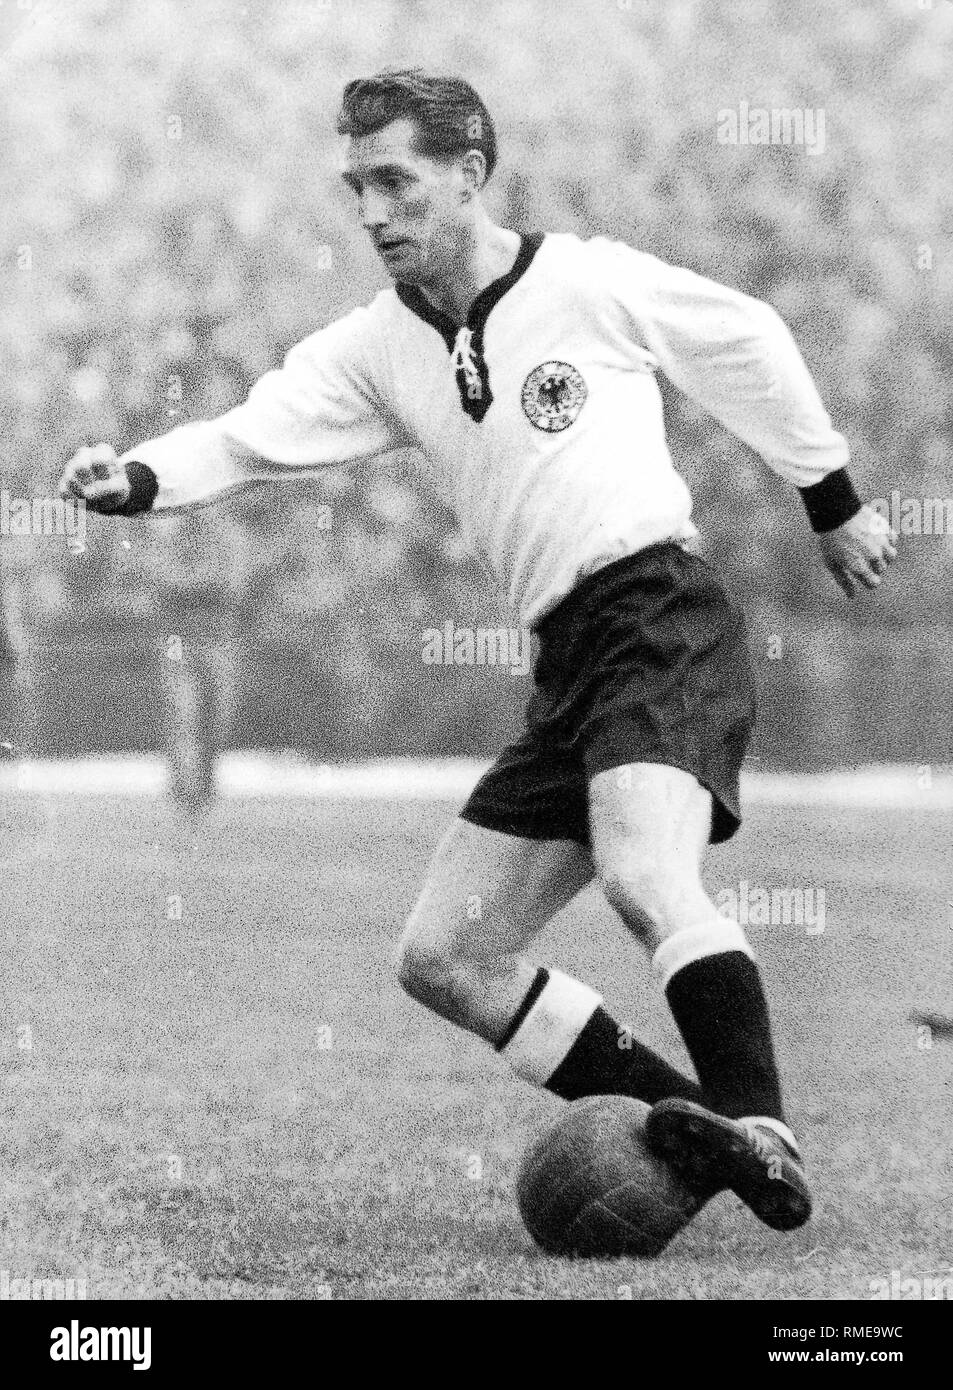 Fritz Walter In The Jersey Of The German National Team Stock Photo Alamy